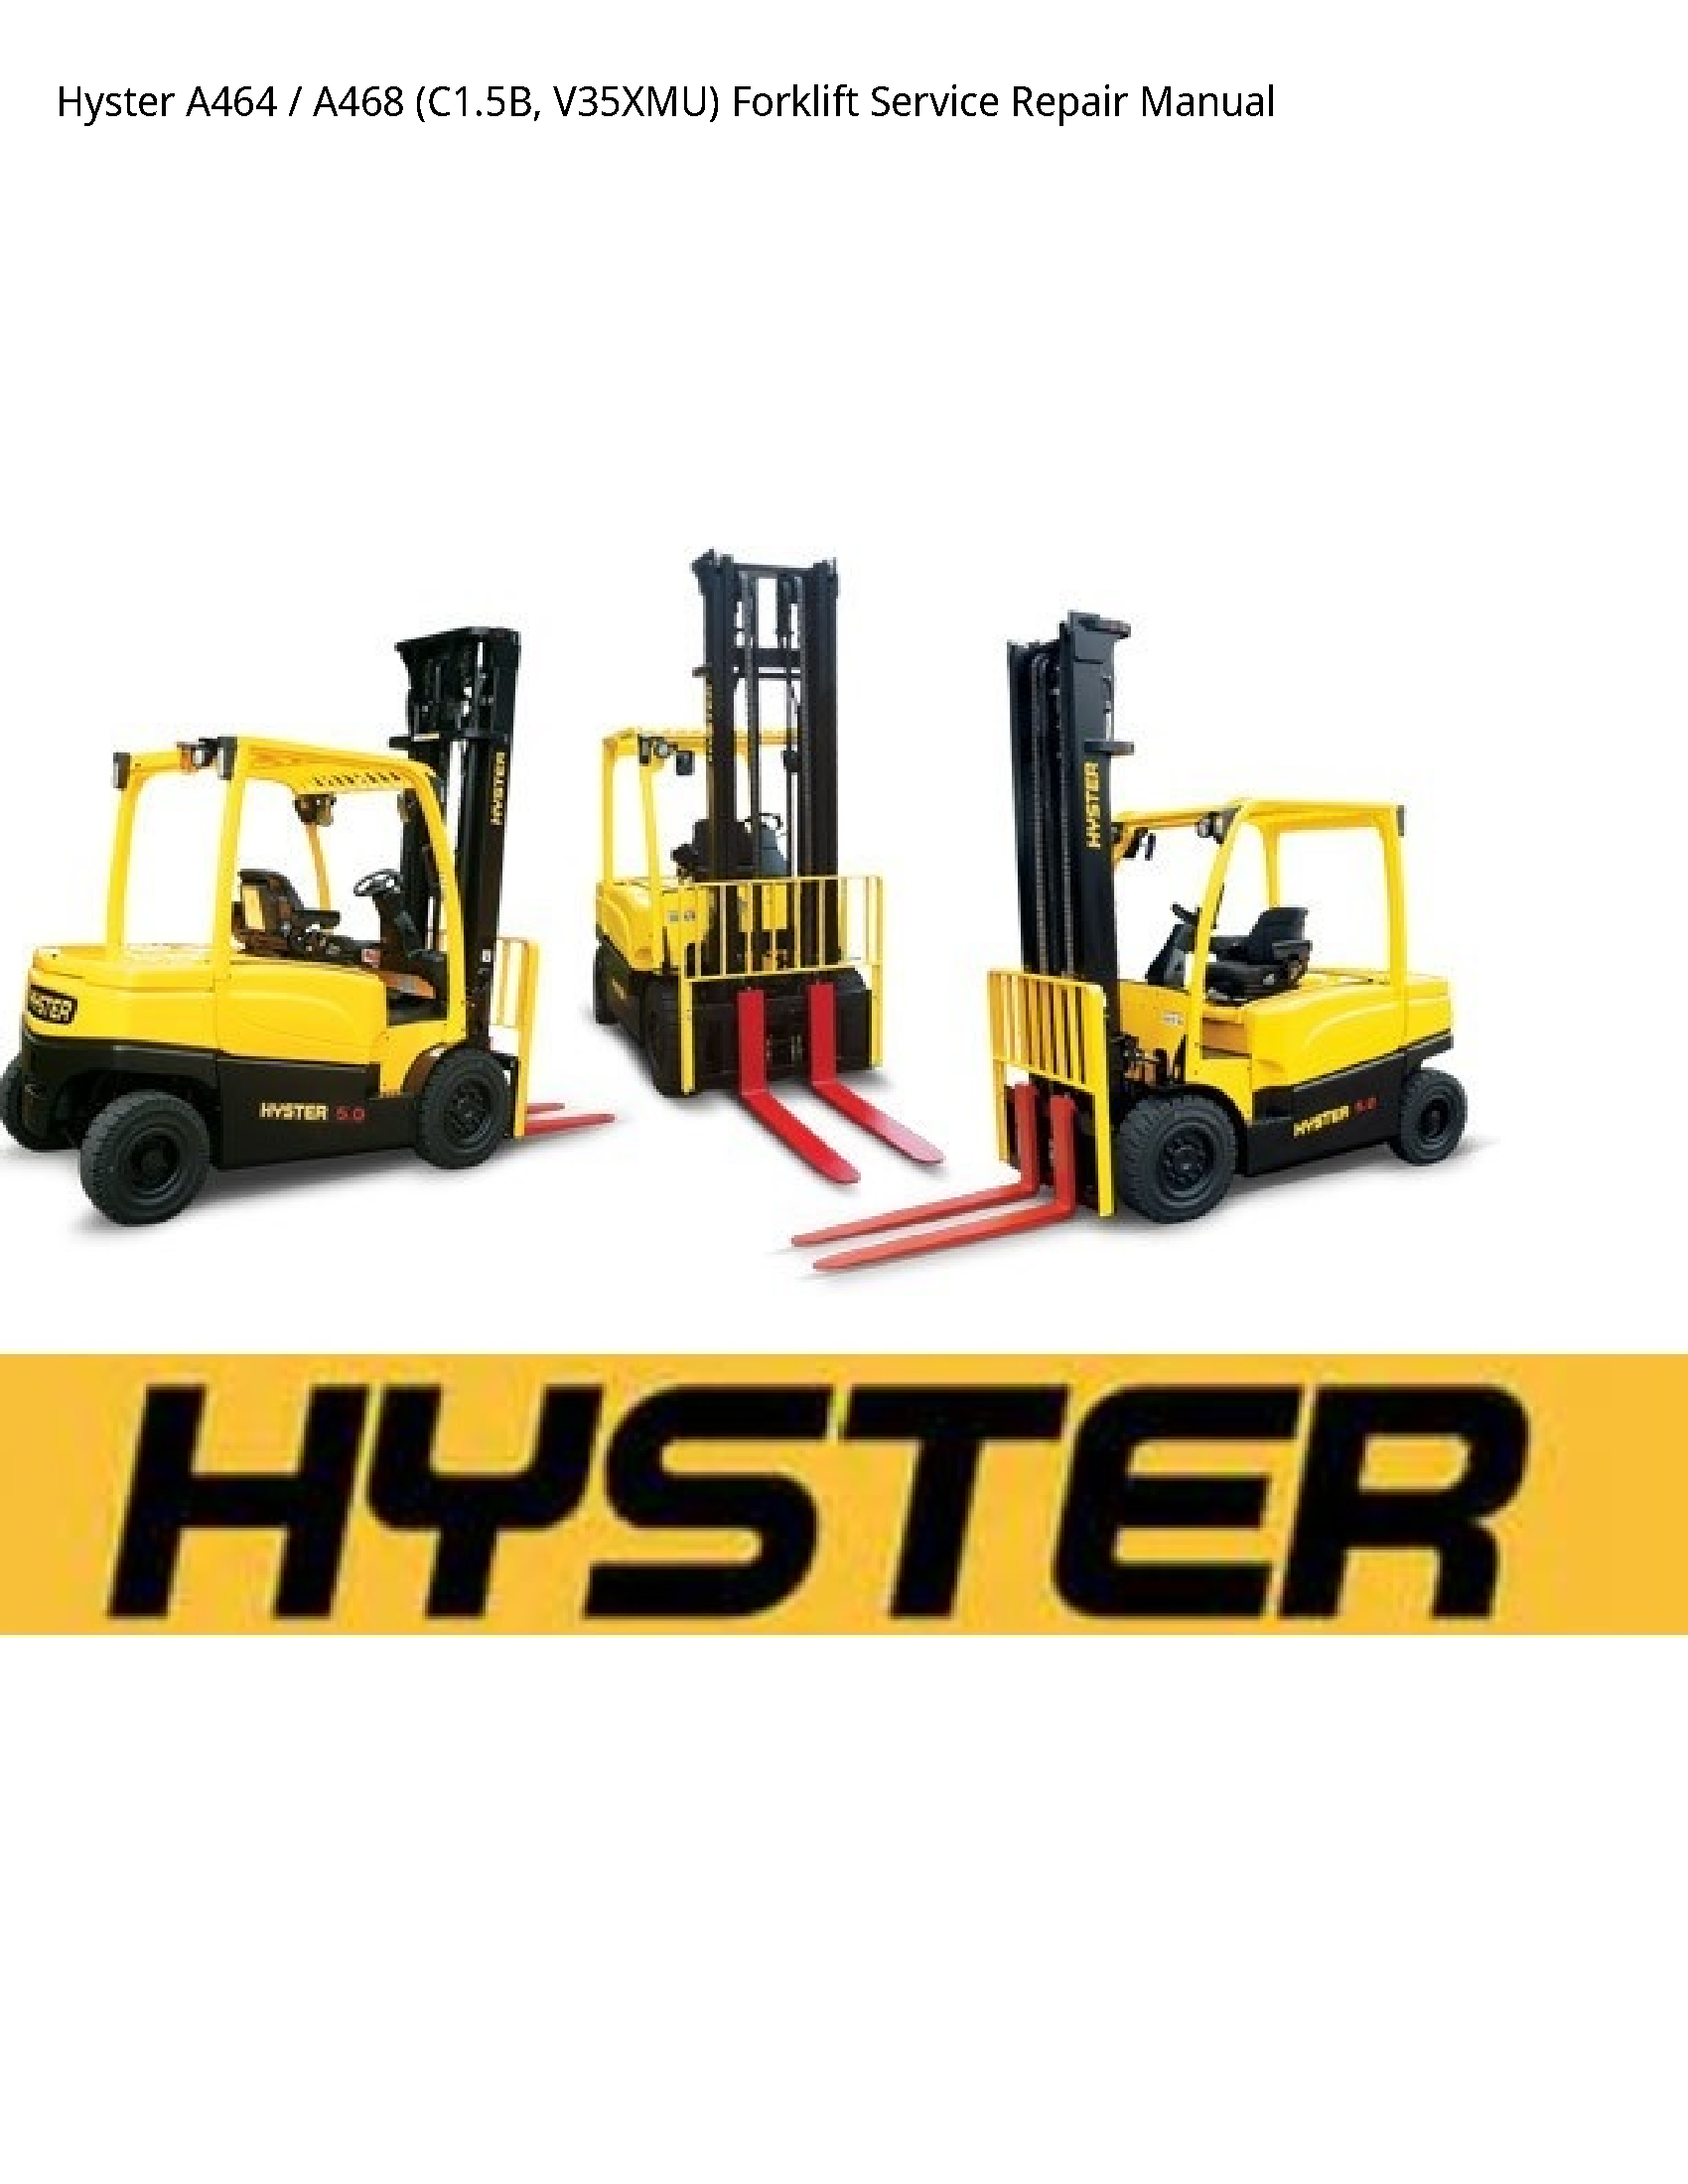 Hyster A464 Forklift manual